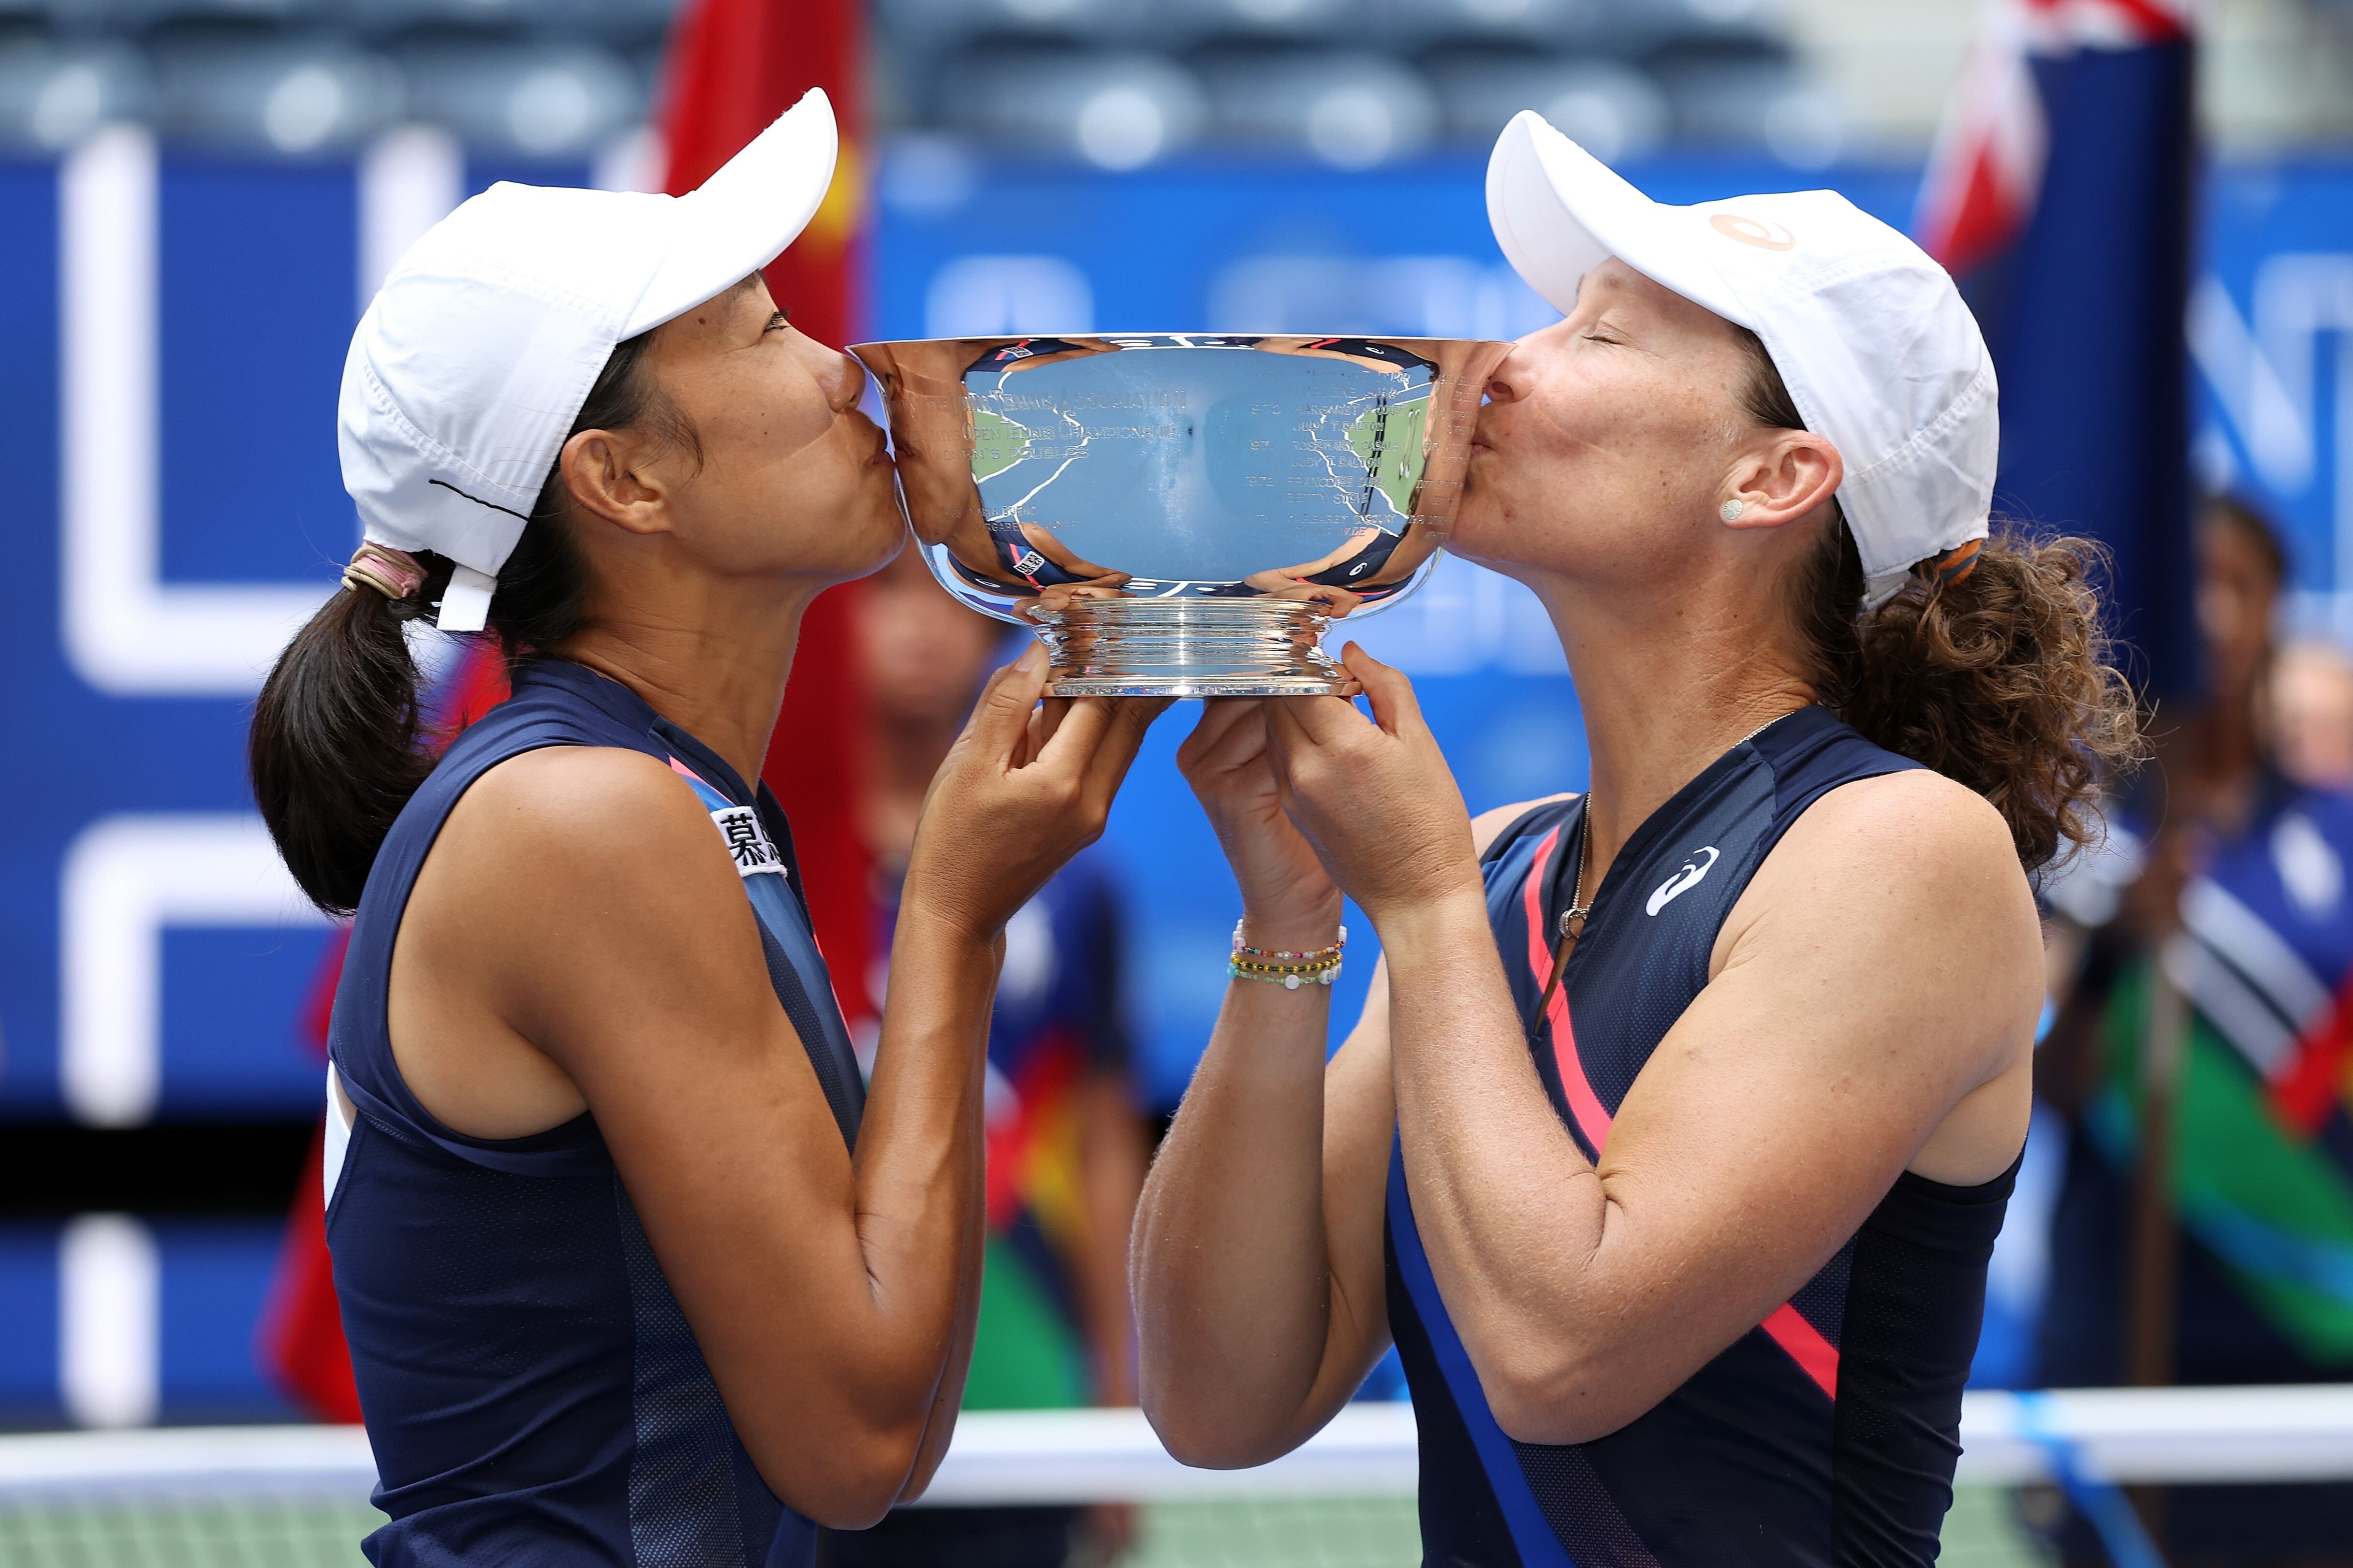 Zhang Shuai of China and Australia’s Samantha Stosur celebrate with the championship trophy after defeating US duo Coco Gauff and Catherine McNally at the 2021 US Open. Photo: AFP